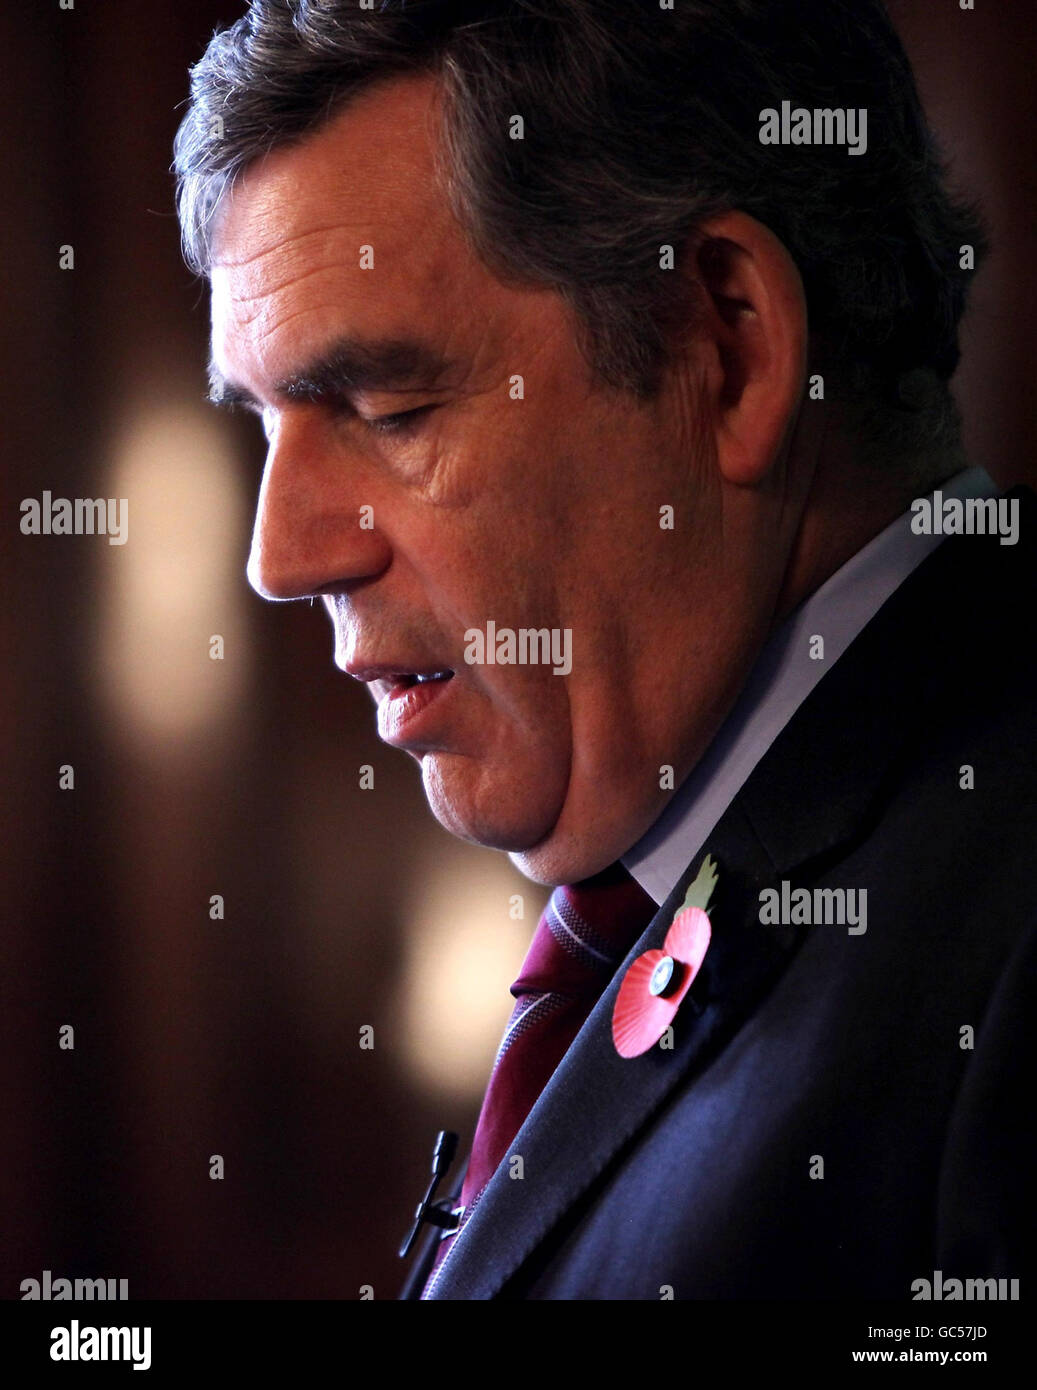 Prime Minister Gordon Brown delivers a speech to the Royal College of Defence Studies, setting out Britain's position in the on-going war in Afghanistan. Stock Photo